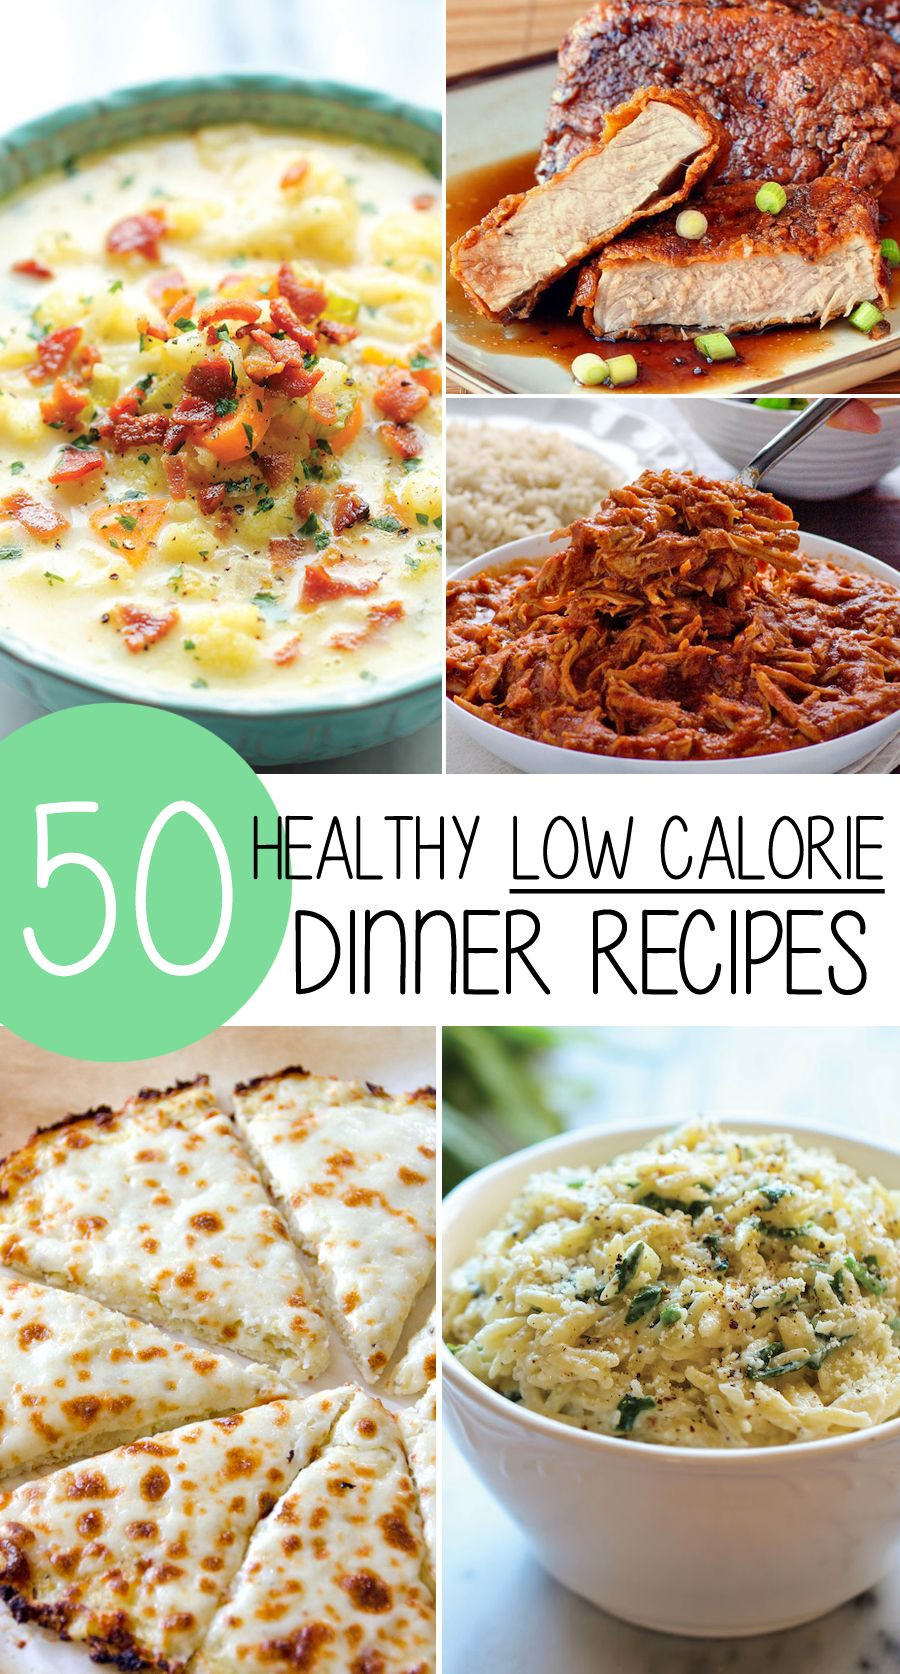 Easy Low Cholesterol Recipes For Dinner
 50 Healthy Low Calorie Weight Loss Dinner Recipes